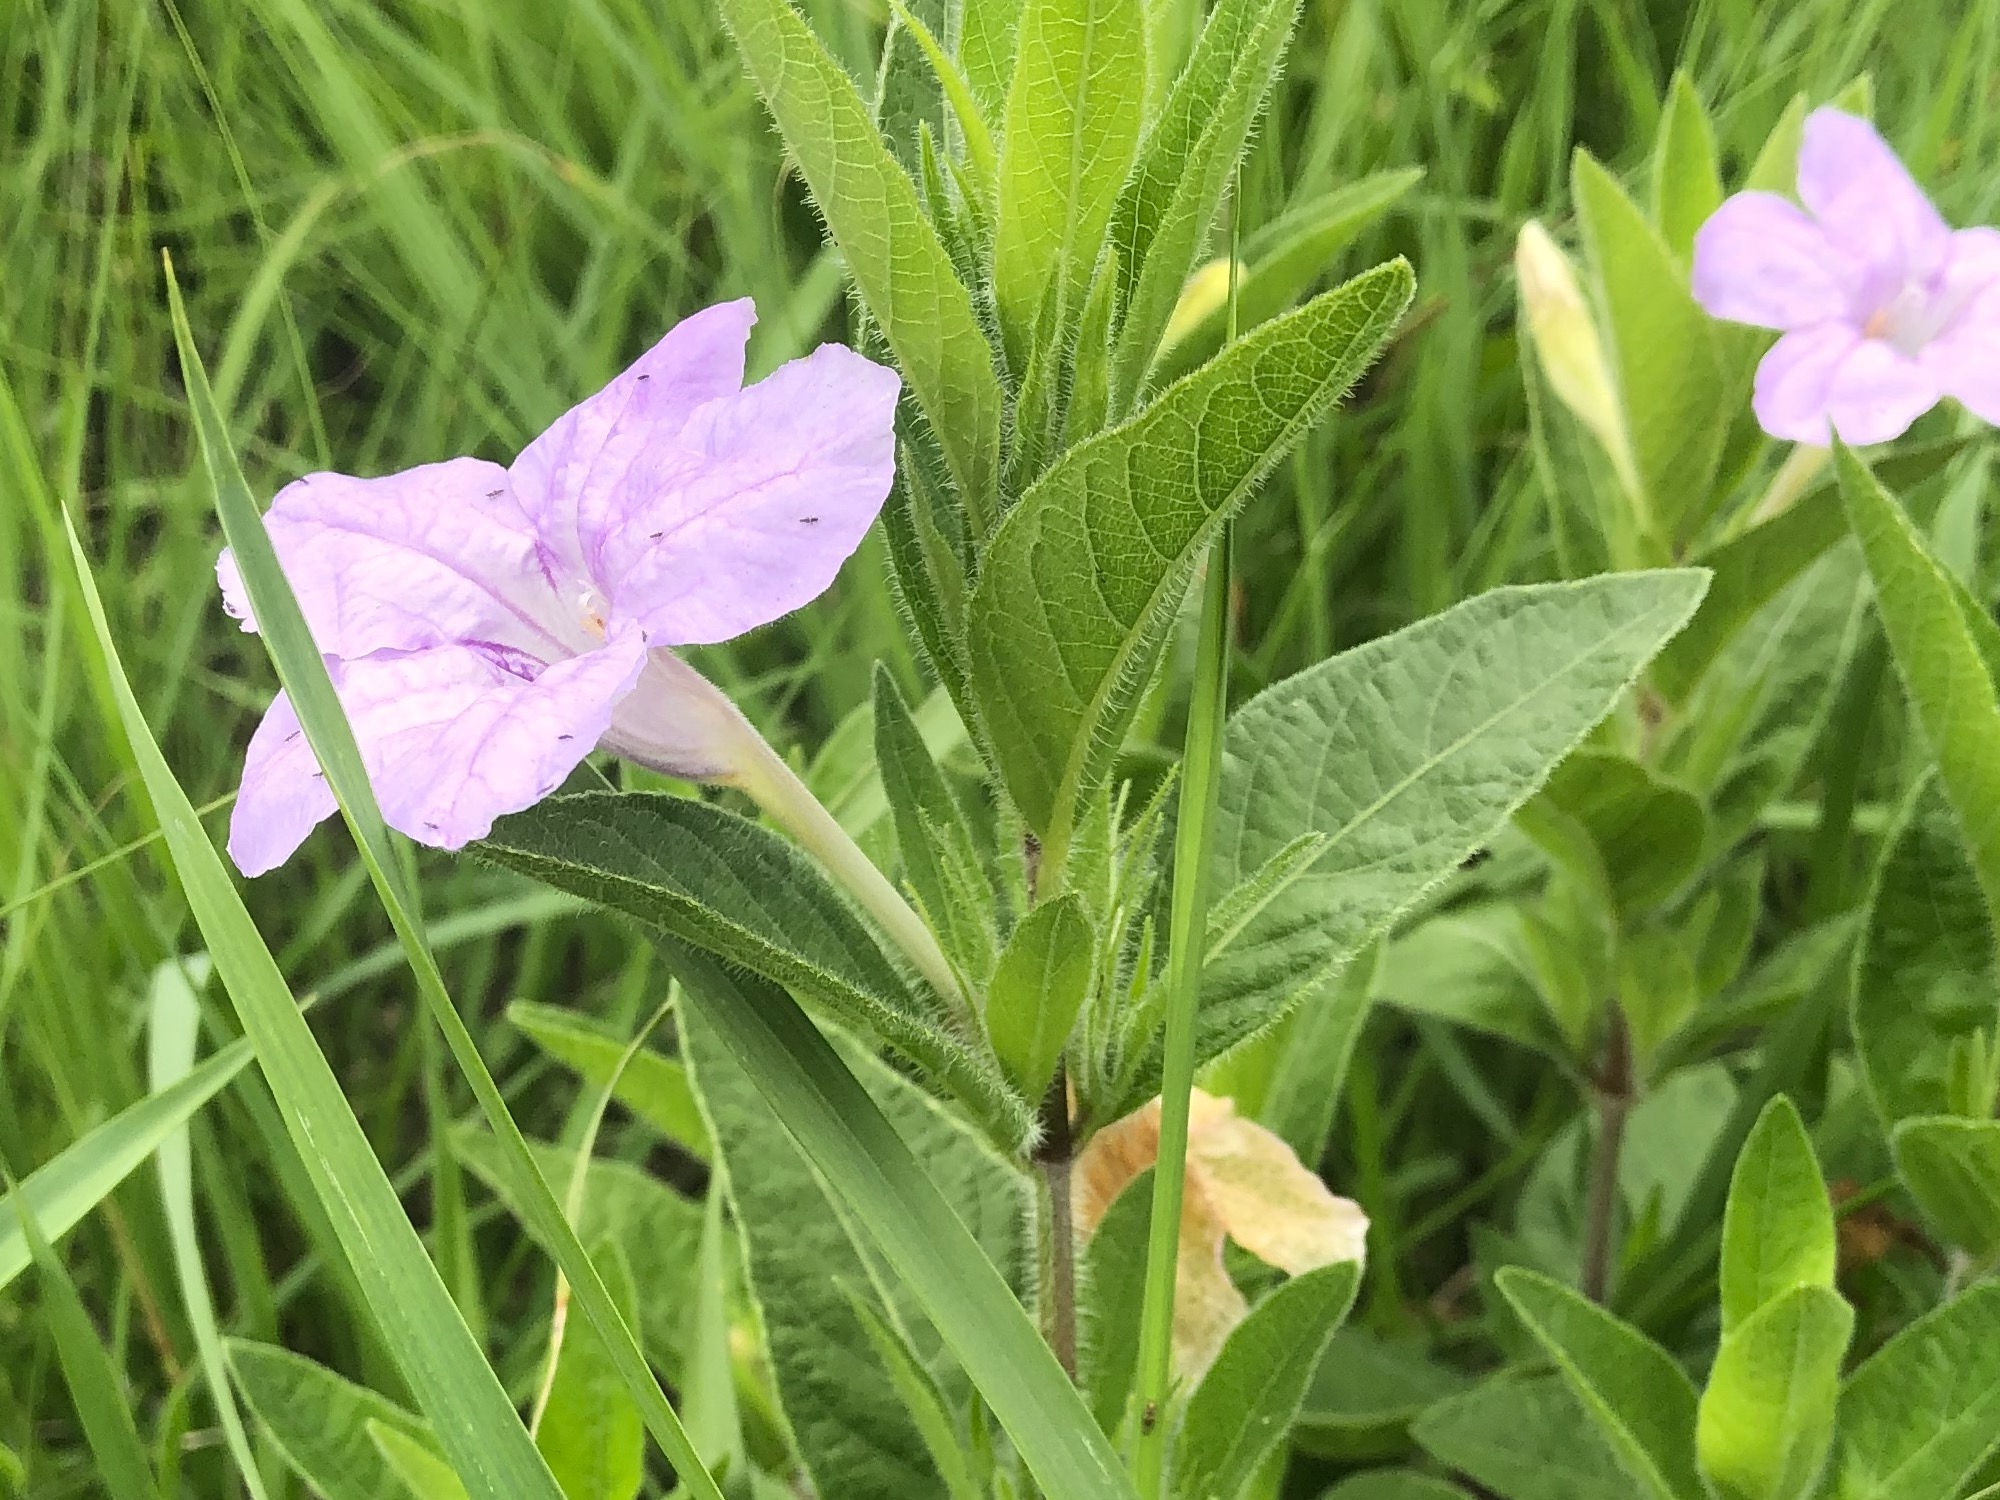 Wild Petunia off of Bike Path behind Gregory Street in Madison, Wisconsin on June 28, 2021.